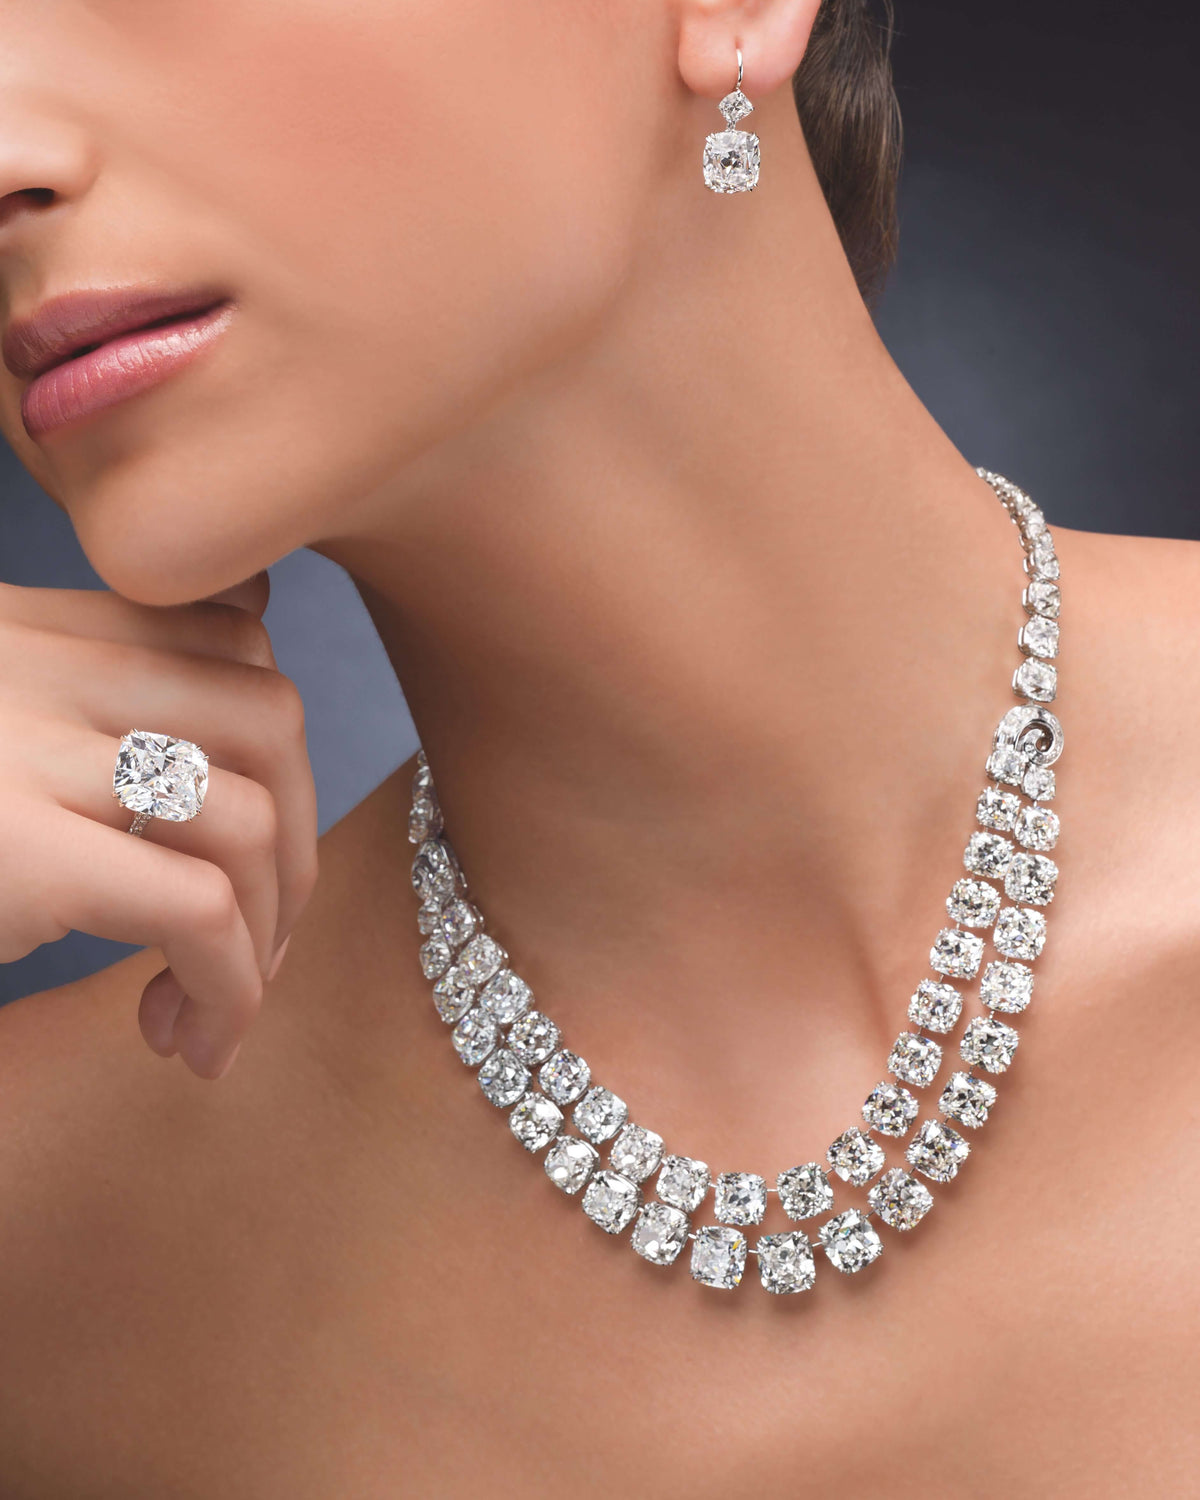 Introducing Our Latest High Jewellery Piece: The Old Mine Diamond Necklace